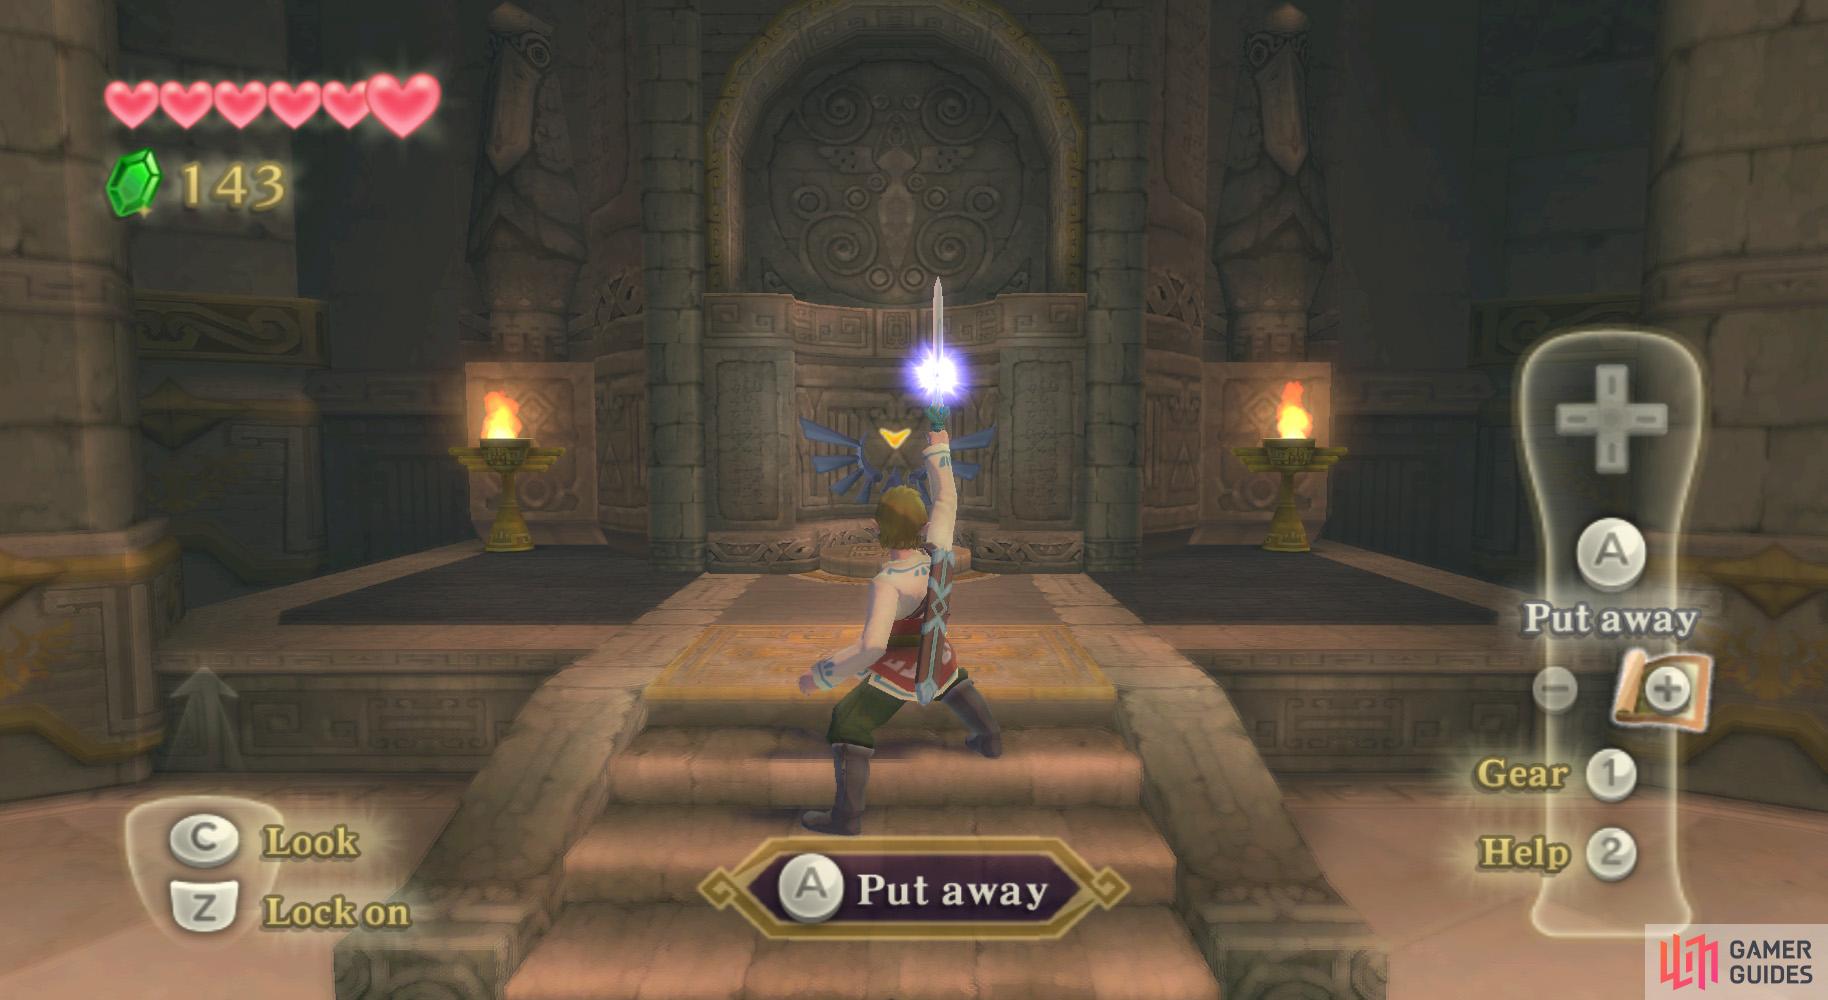 Point your Wiimote directly upwards to charge the Skyward Strike.